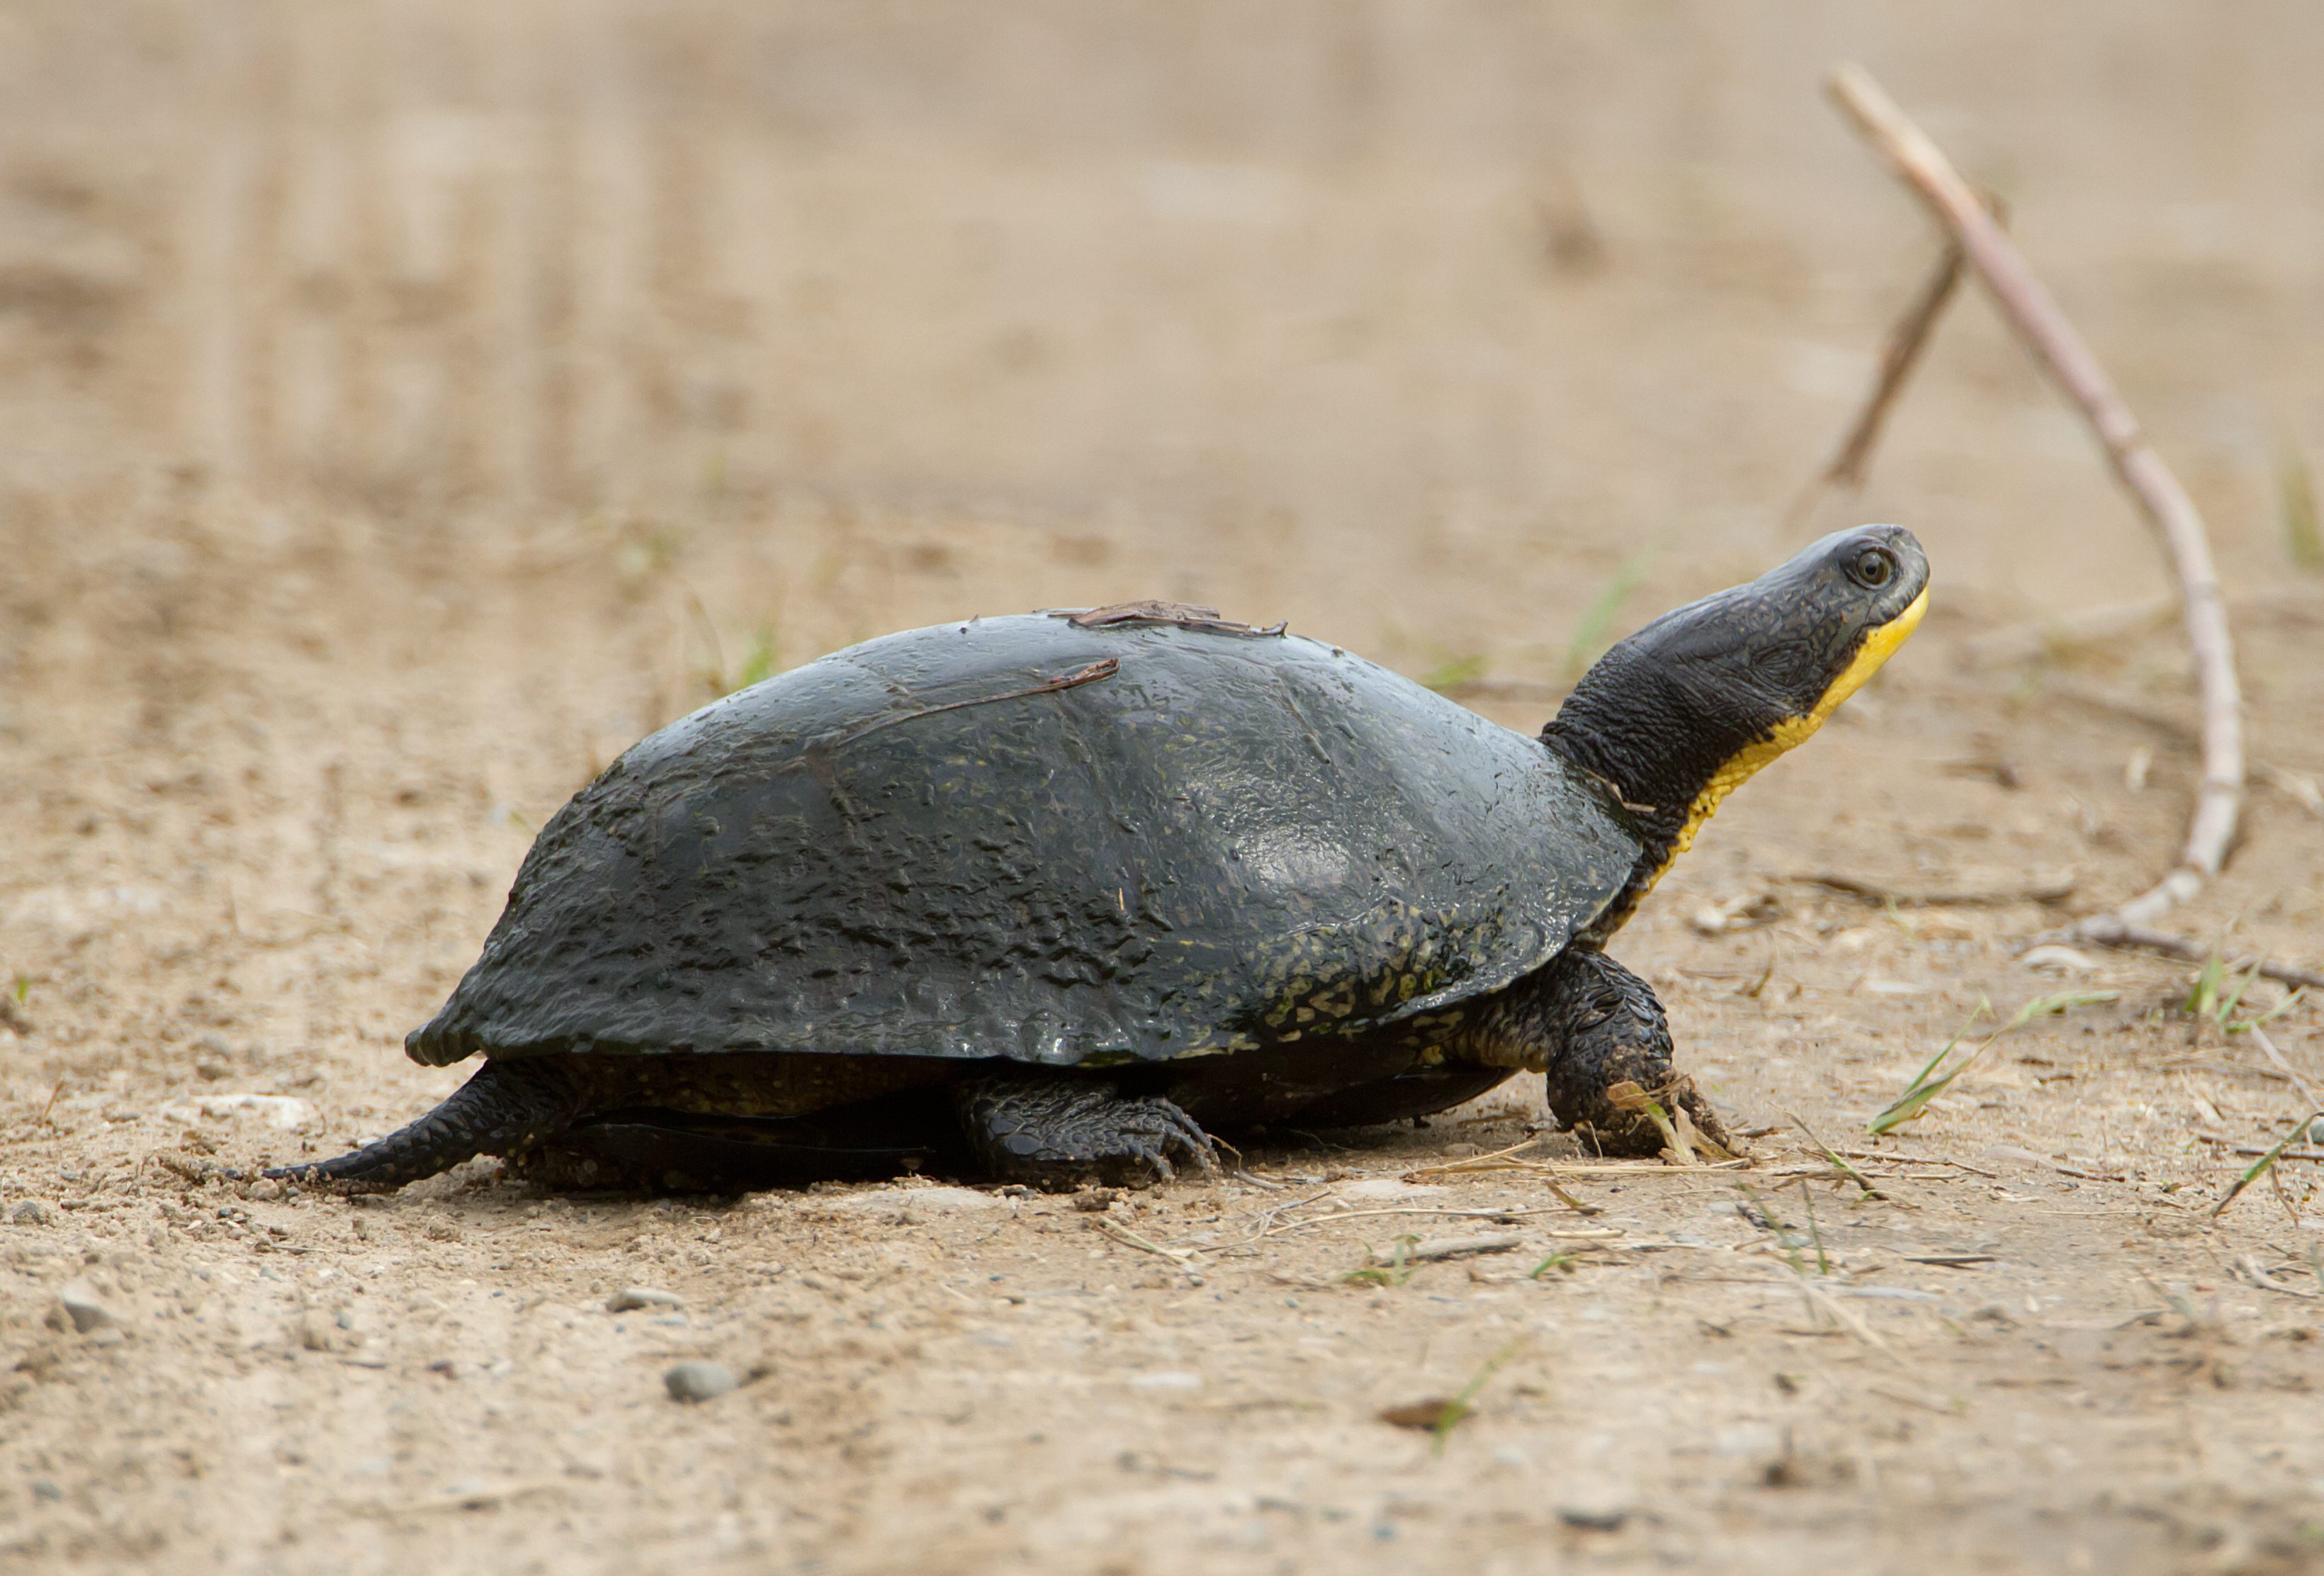 The endangered blanding's turtle could be impacted by increased quarries and pits.